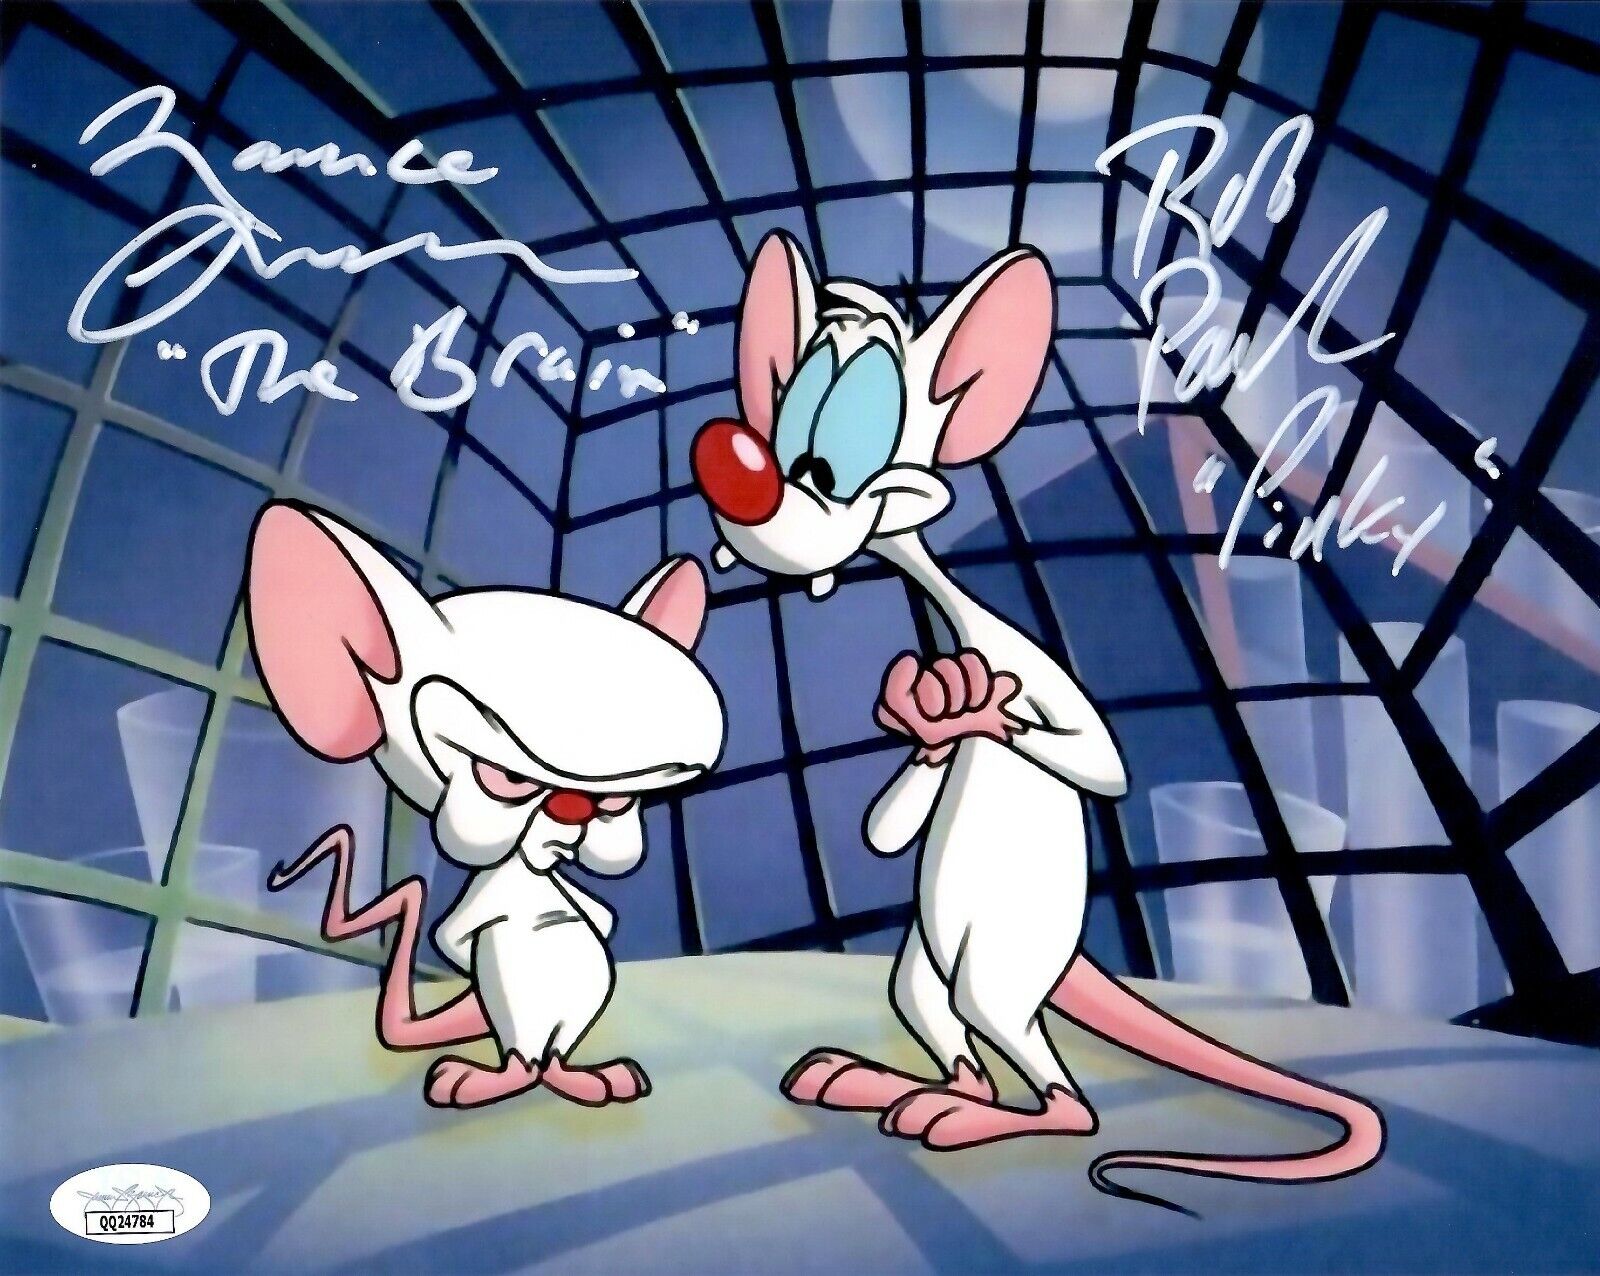 Rob Paulsen Maurice LaMarche signed inscribed 8x10 Photo Poster painting Pinky and the Brain JSA